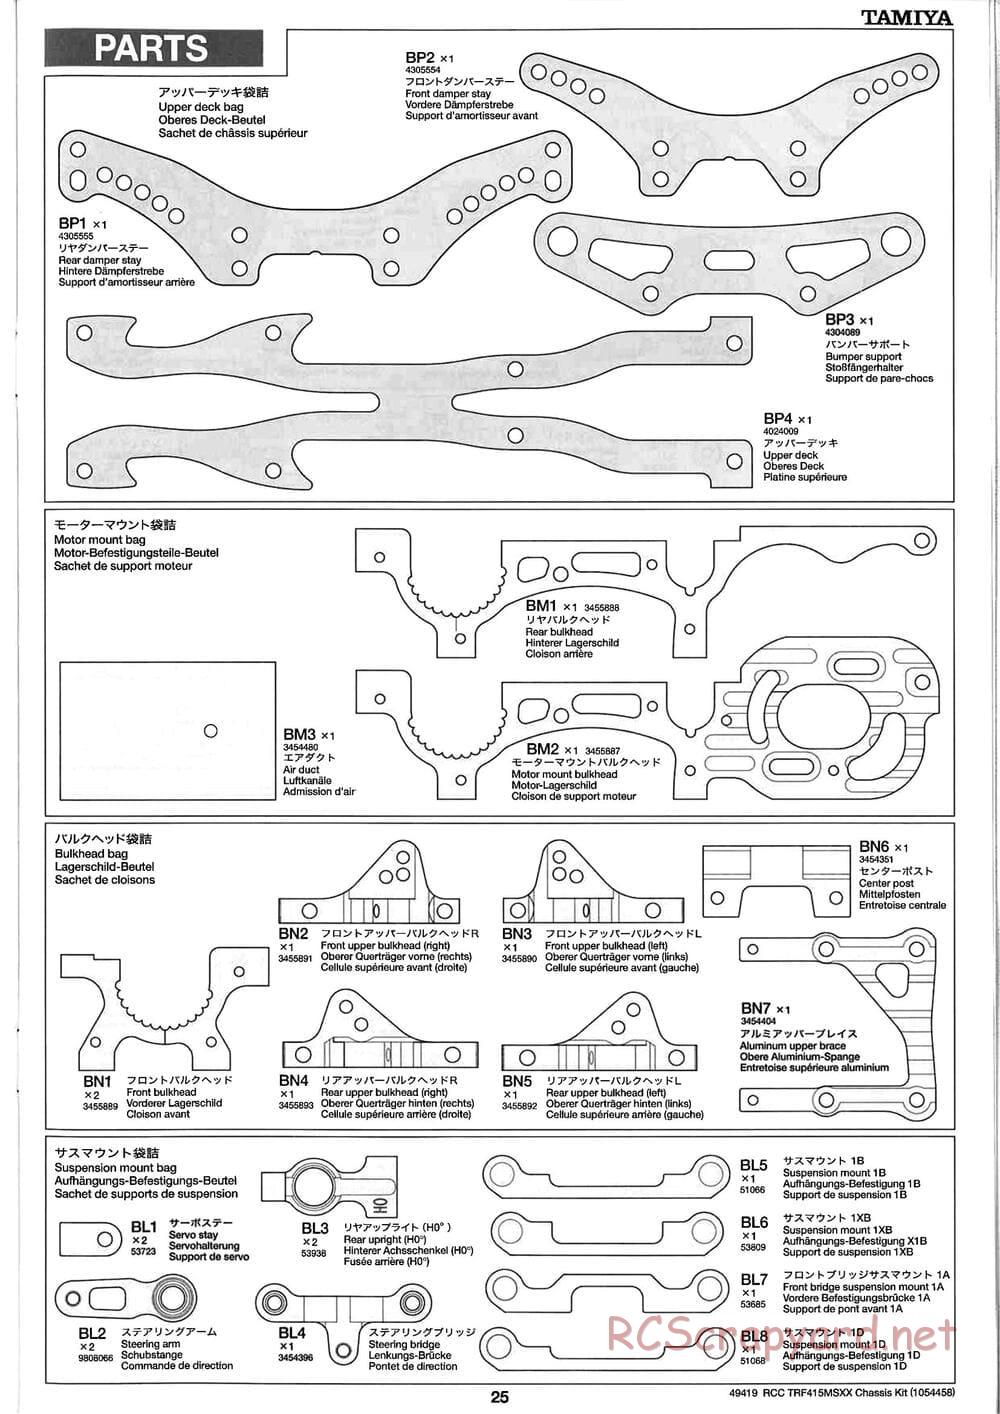 Tamiya - TRF415-MSXX Chassis - Manual - Page 25